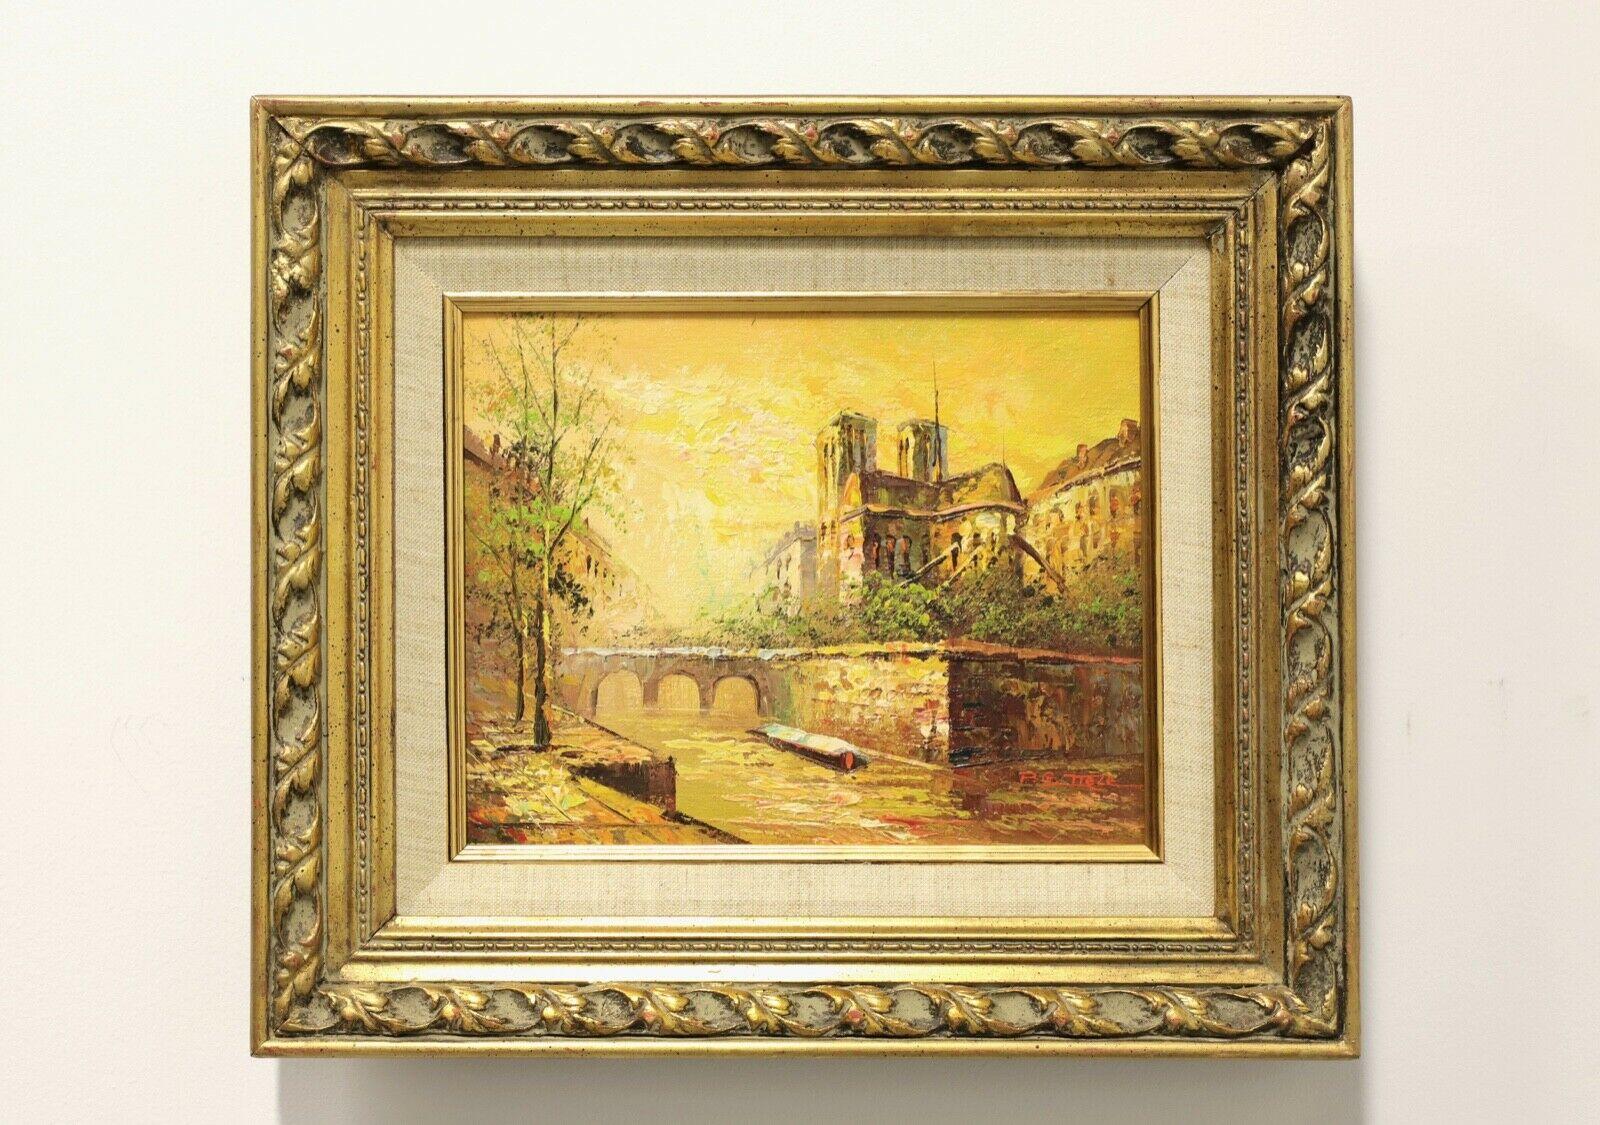 Unknown Original Acrylic on Canvas Painting - Notre-Dame On Seine - Signed P.G. Tiele For Sale